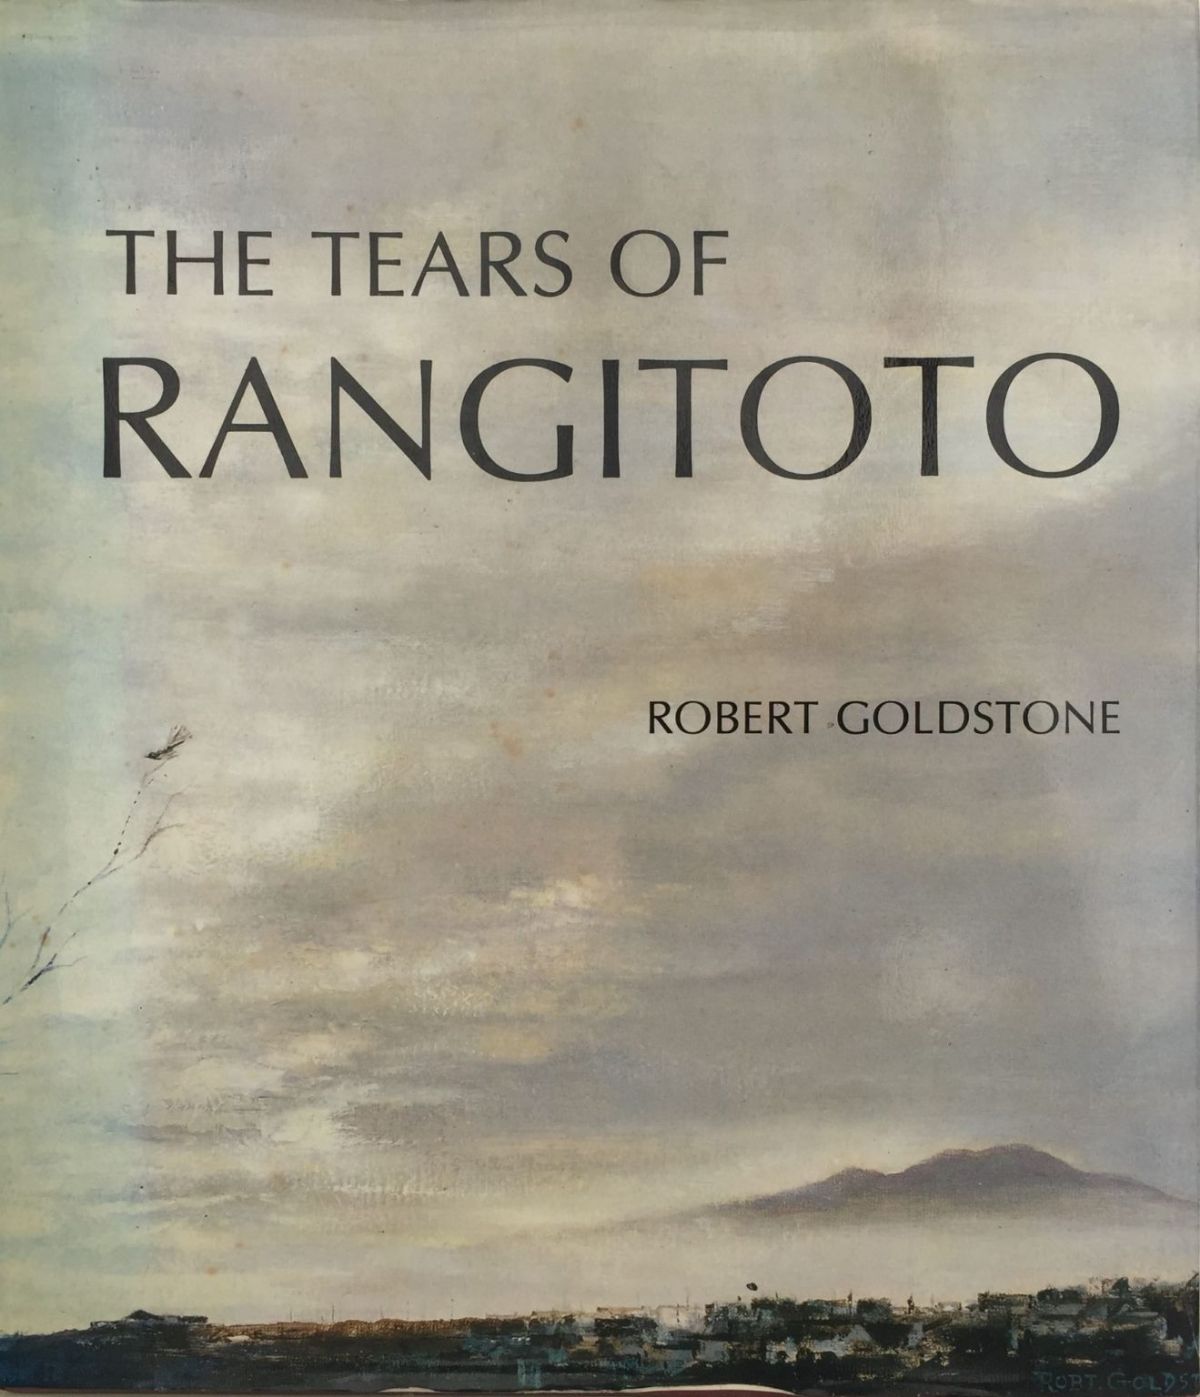 THE TEARS OF RANGITOTO